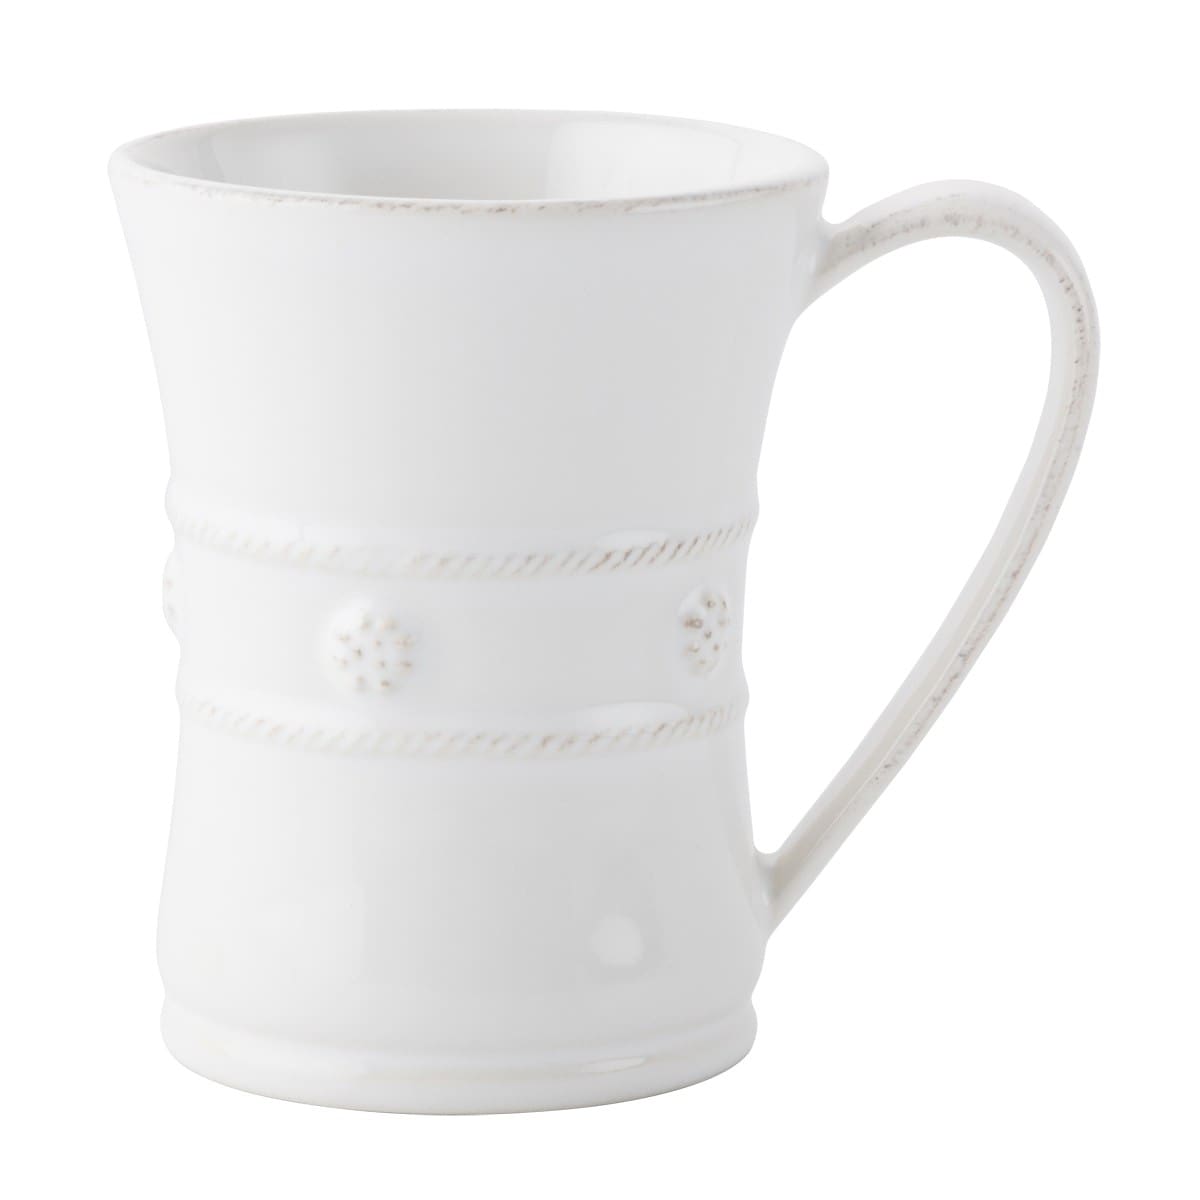 The Berry & Thread Whitewash Mugs are finished in a boho chic off-white, with simple bohemian detailing. Find them at our Kiawah home decor stores